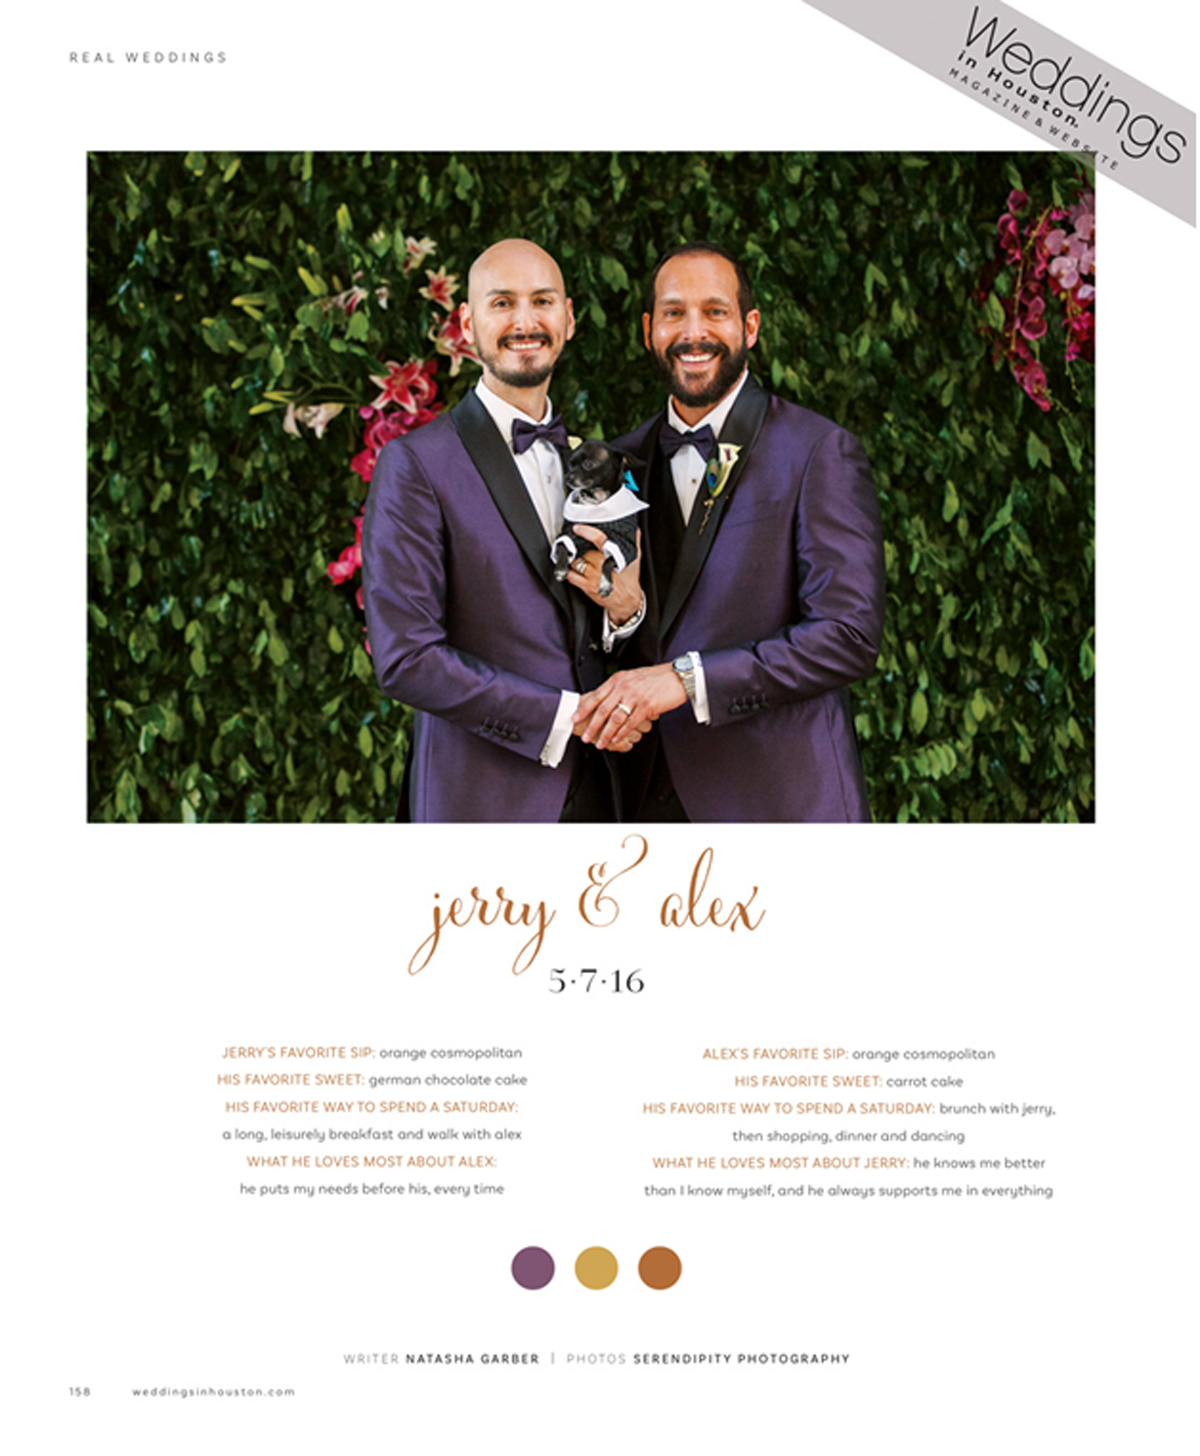 WiH_Wedding Feature_Page 1.jpg